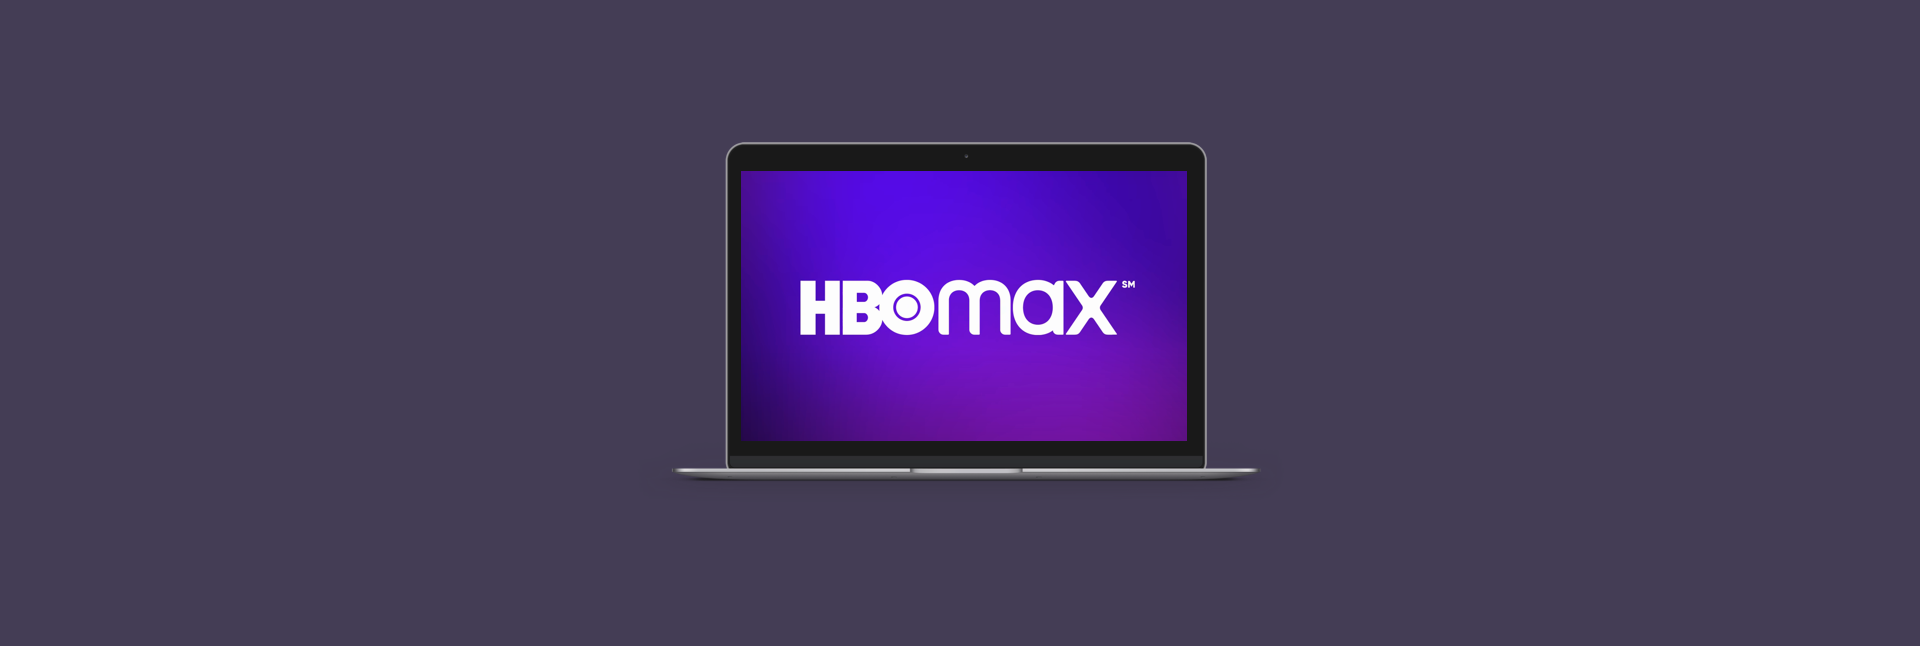 How to Stream HBO Max on any Mac